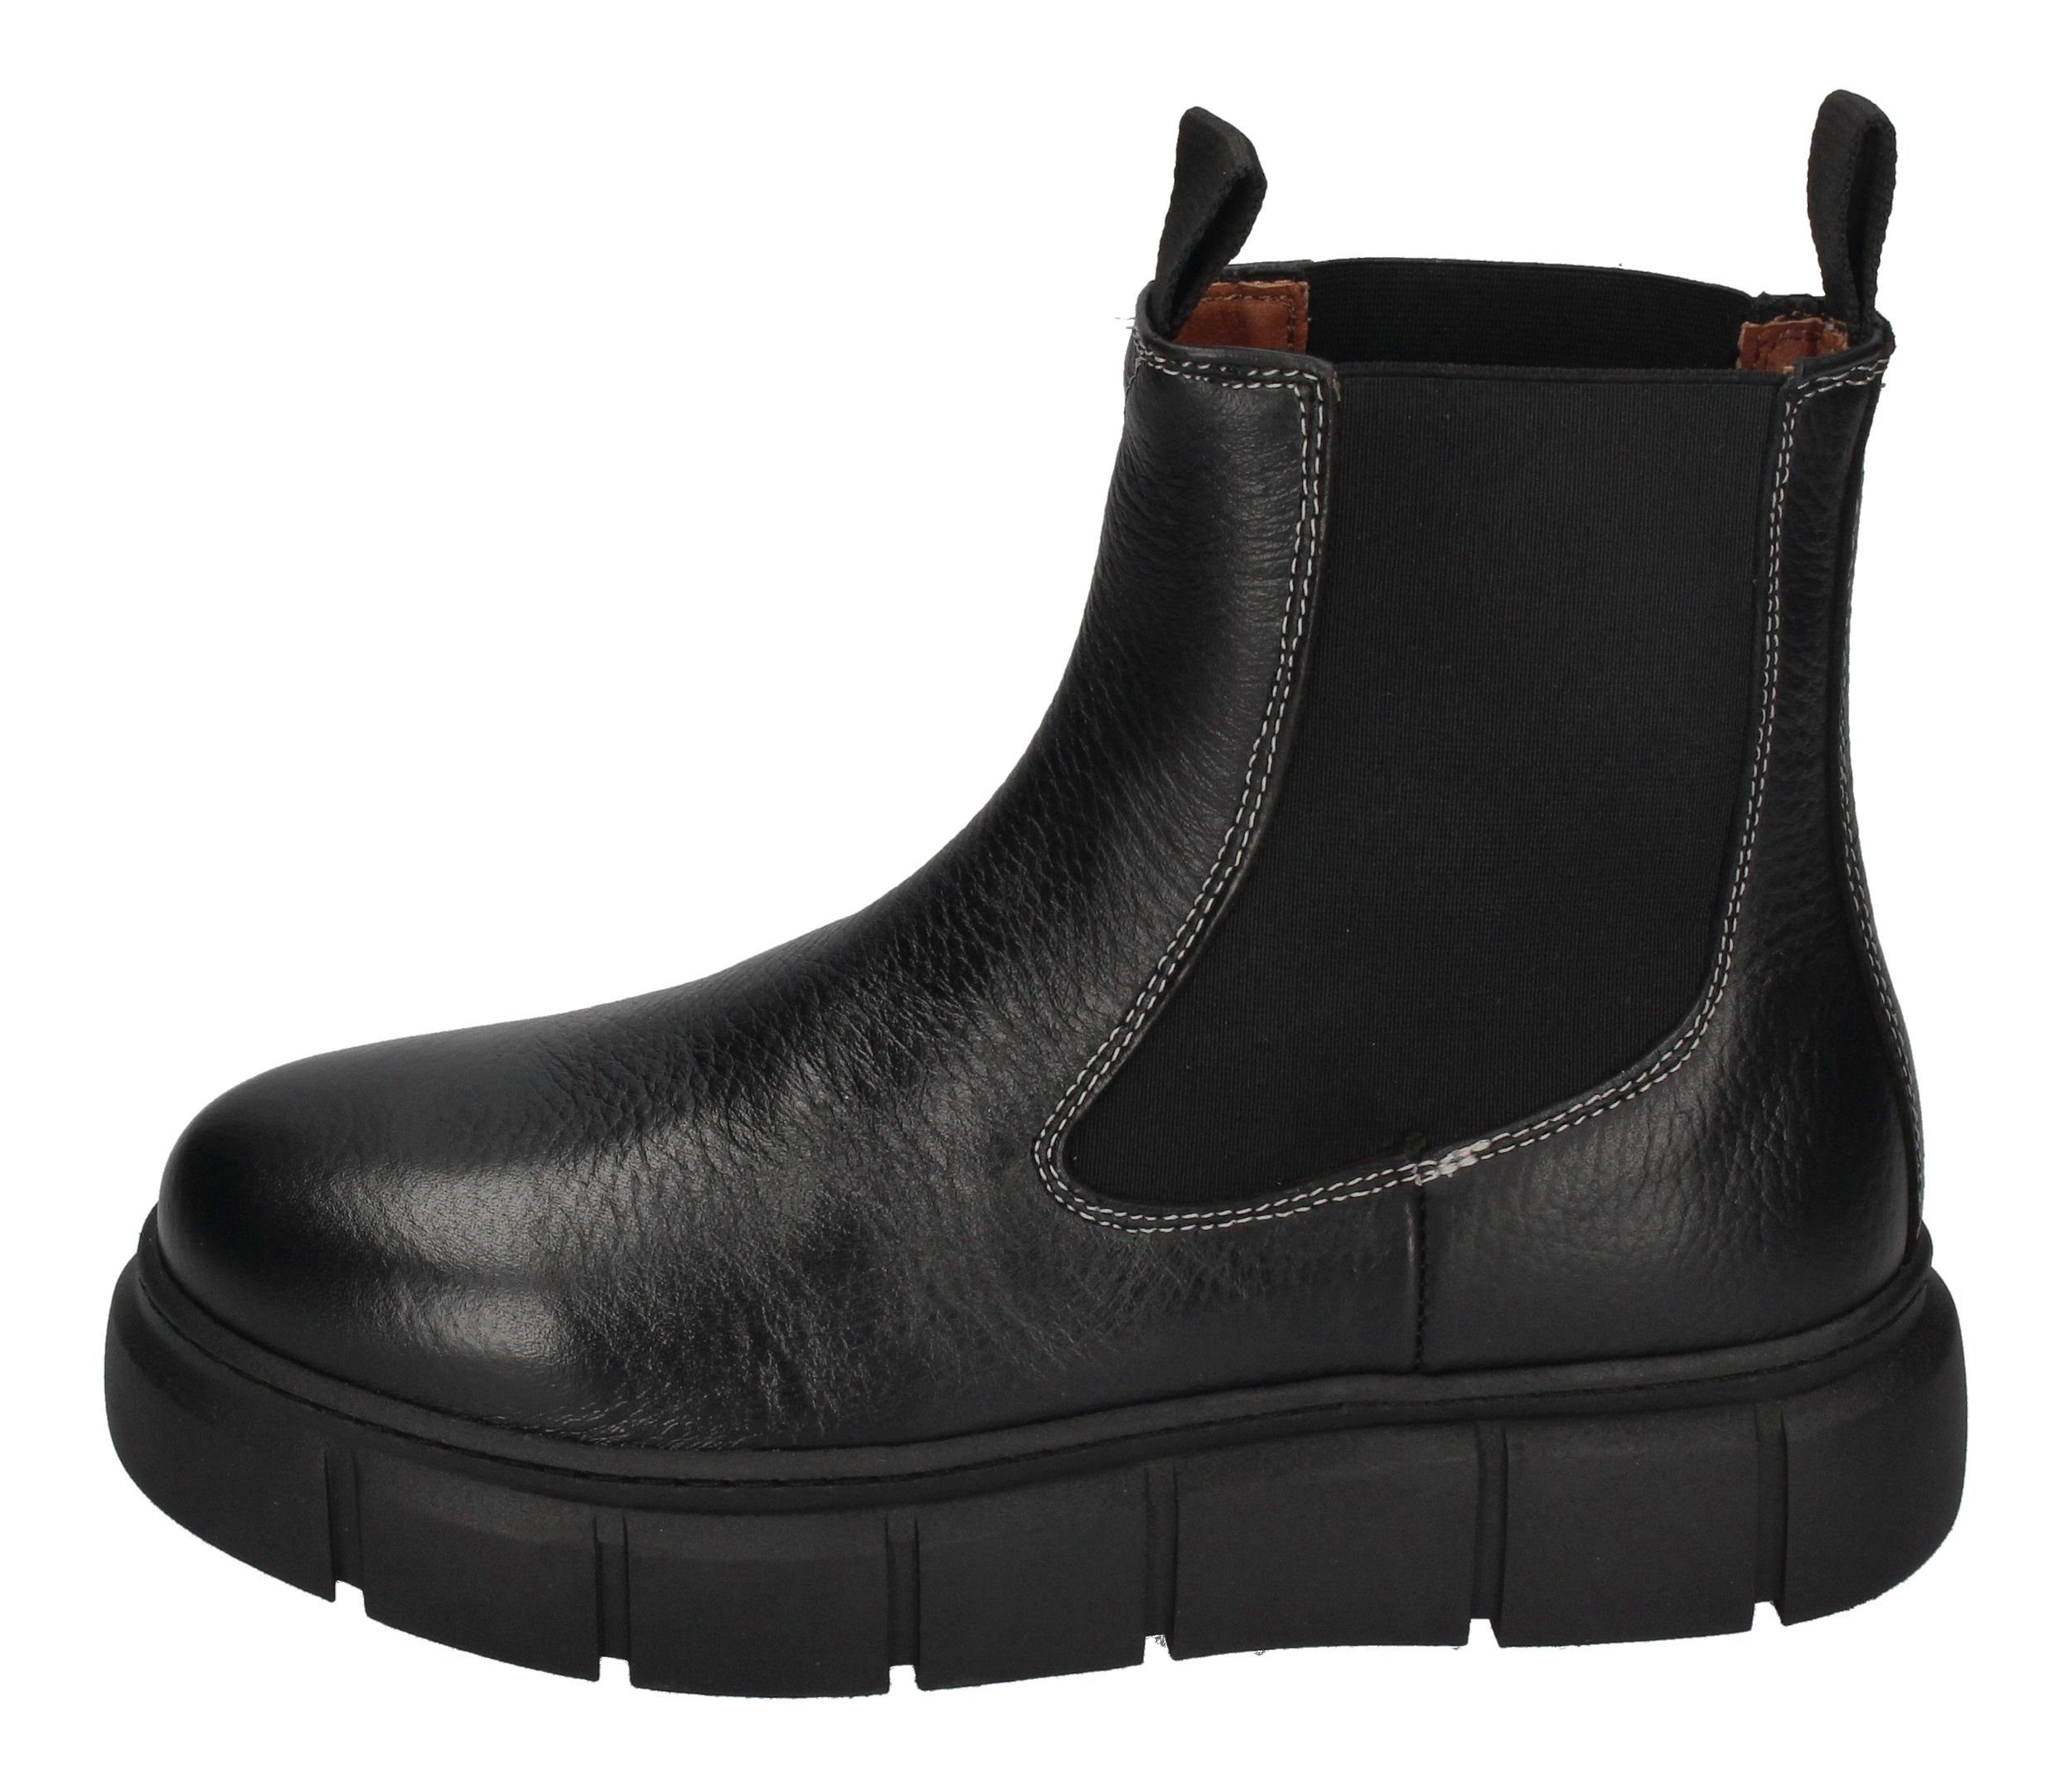 SHOE Black TOVE STB2072 BEAR Chelseaboots THE